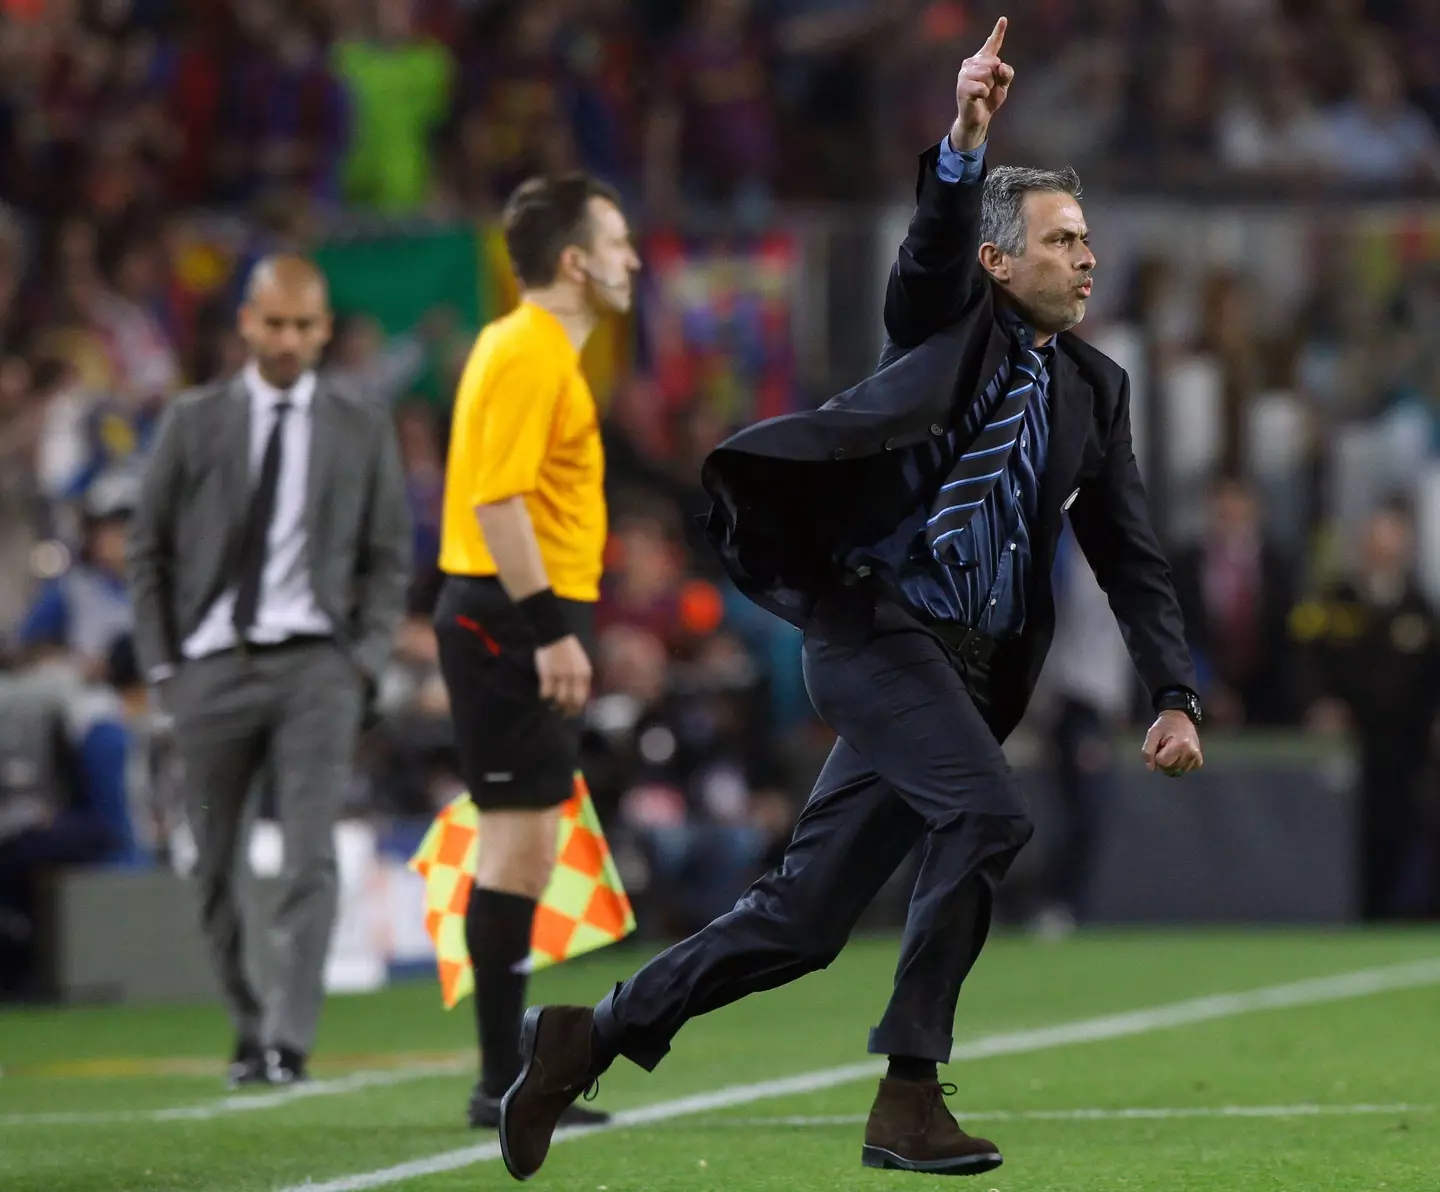 Mourinho pulled off a famous win over Barcelona in the Champions League in 2010 (Image: Alamy)